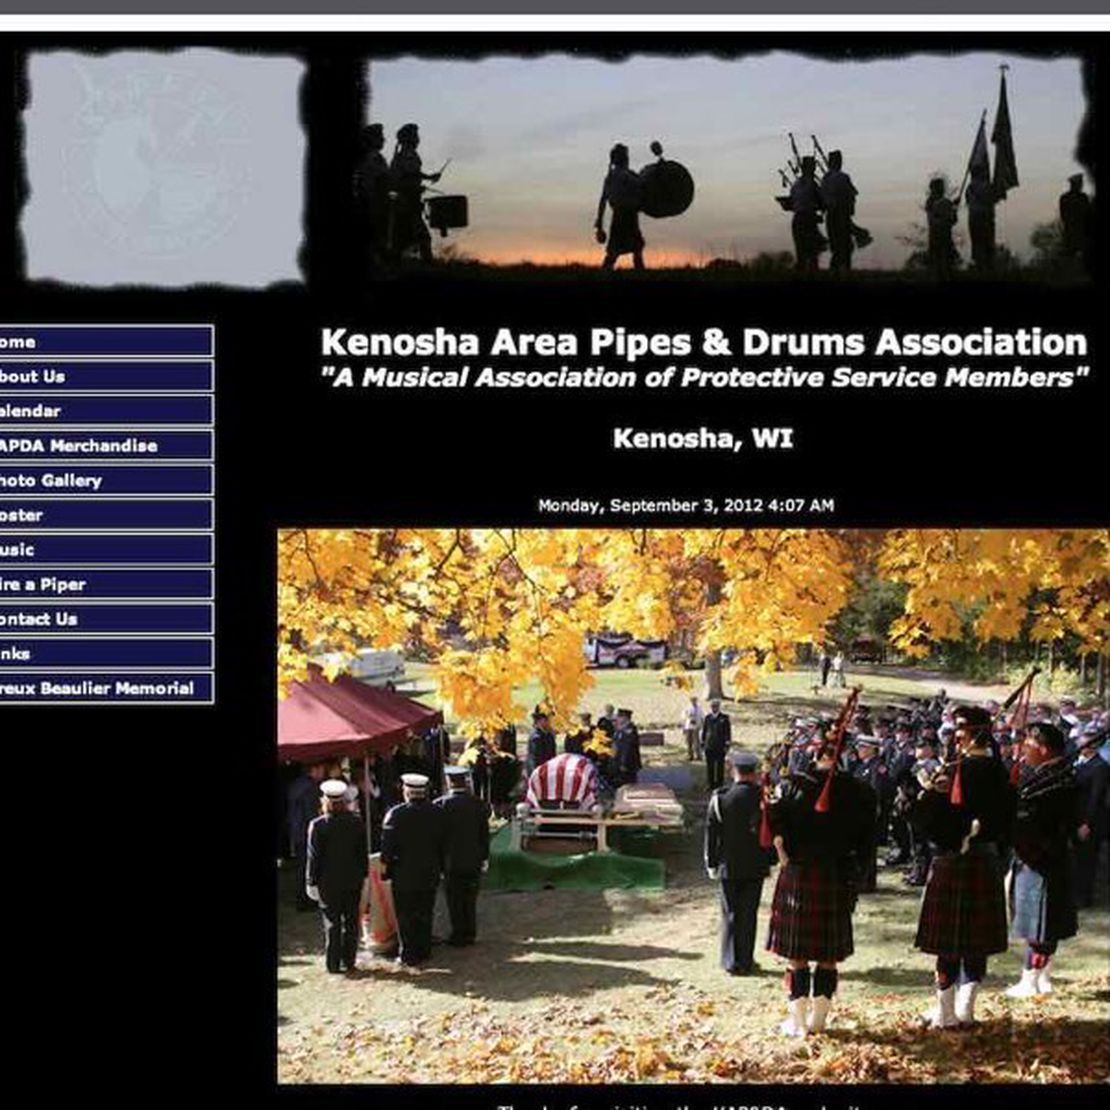 kenosha area pipes and drums association